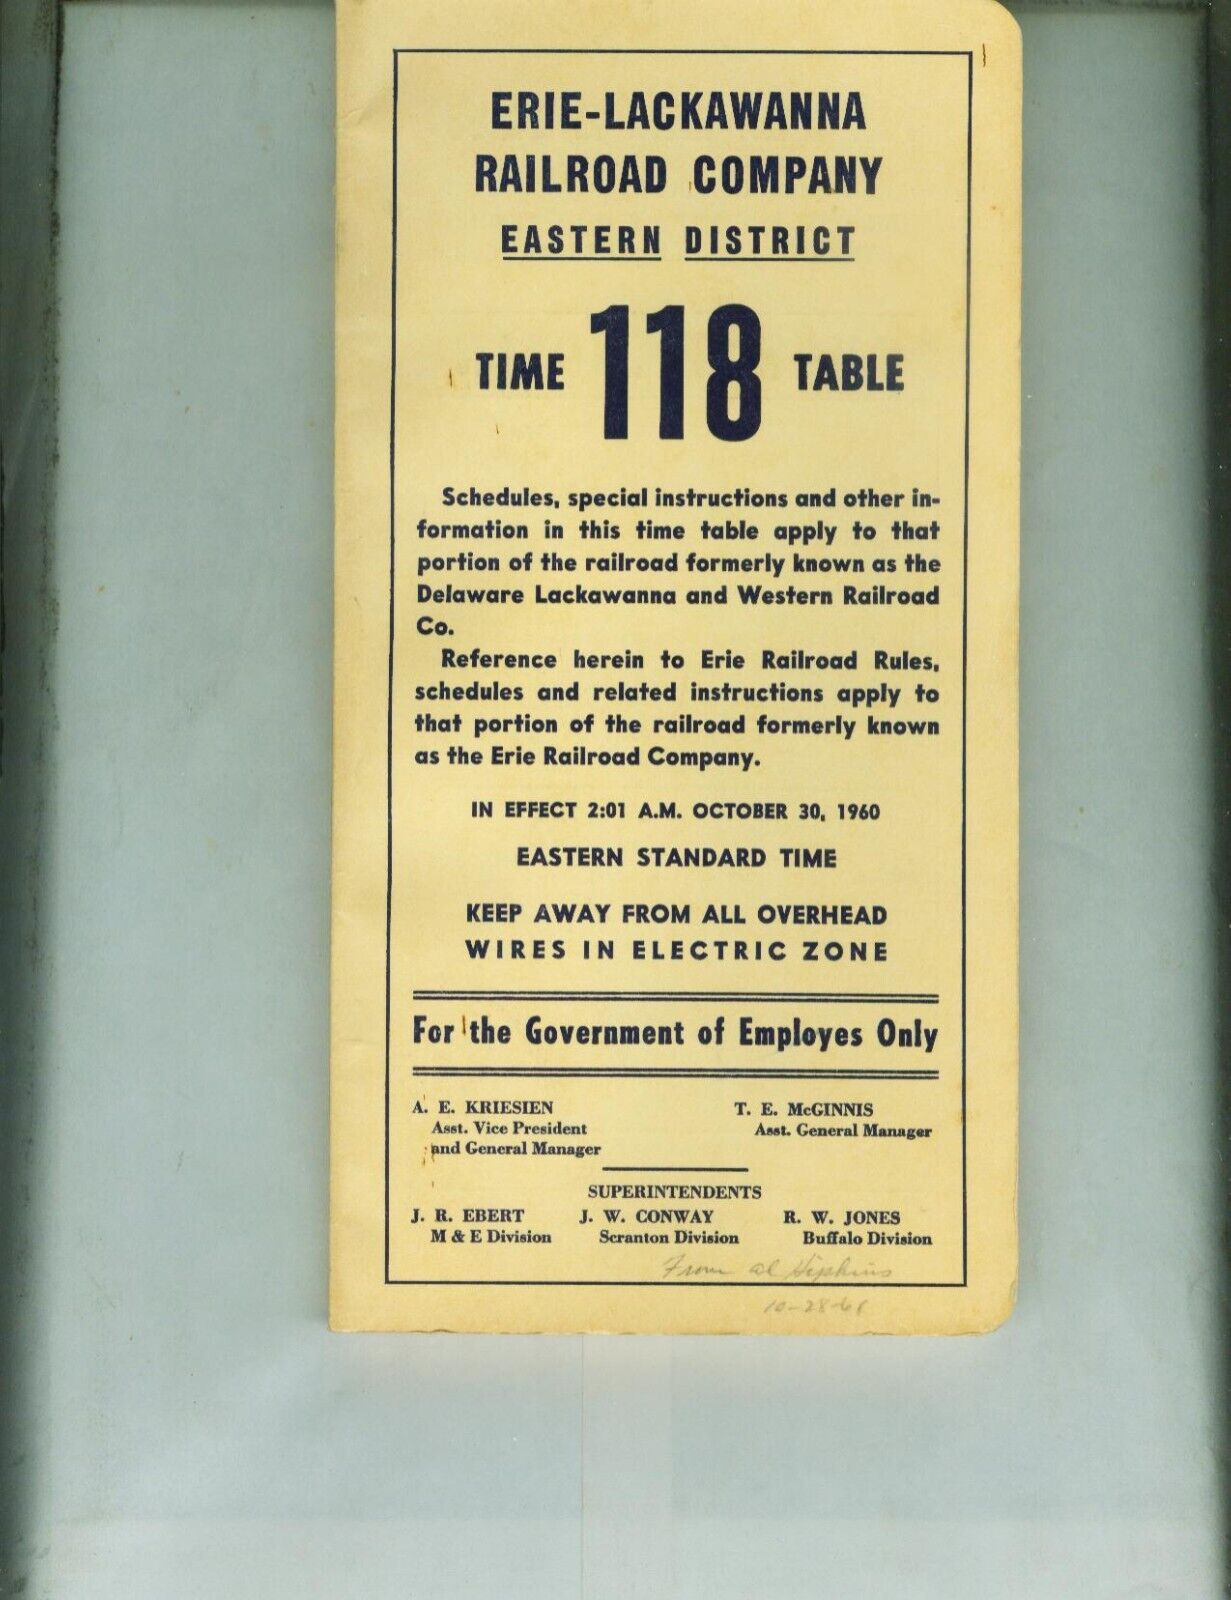 ERIE-LACKAWANNA R.R. ETT TIMETABLE EASTERN DISTRICT #118  10-30-1960  212 PAGES.